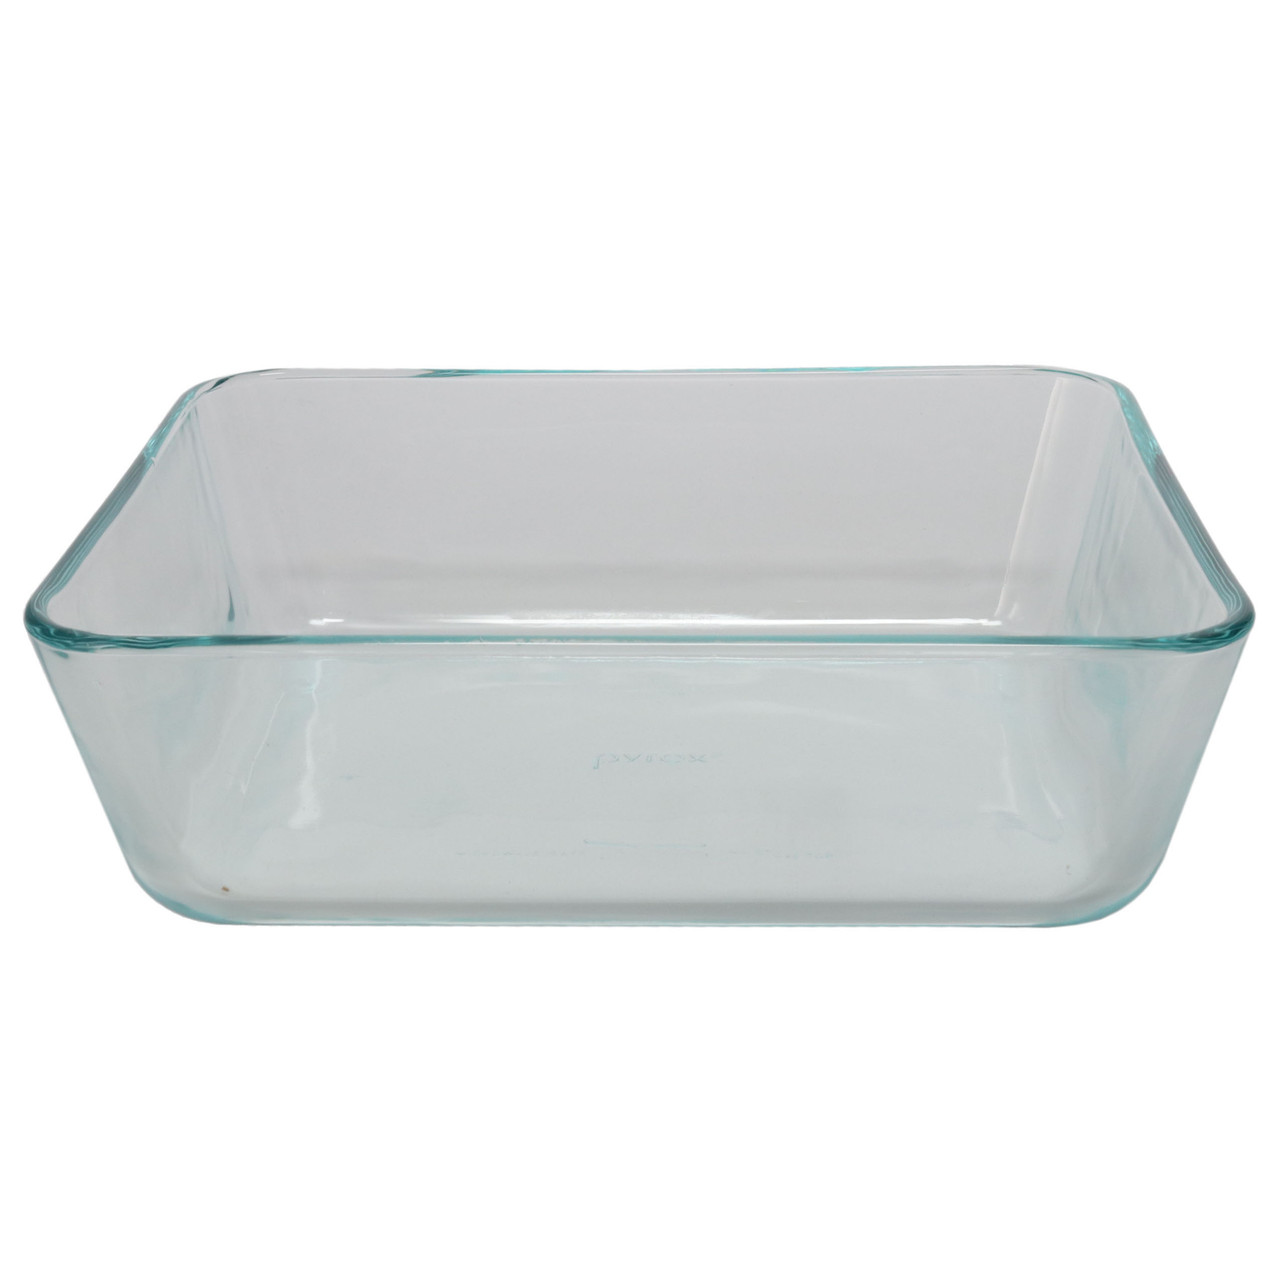 NEW- Pyrex Simply Store 3 Cup Glass Storage Dish